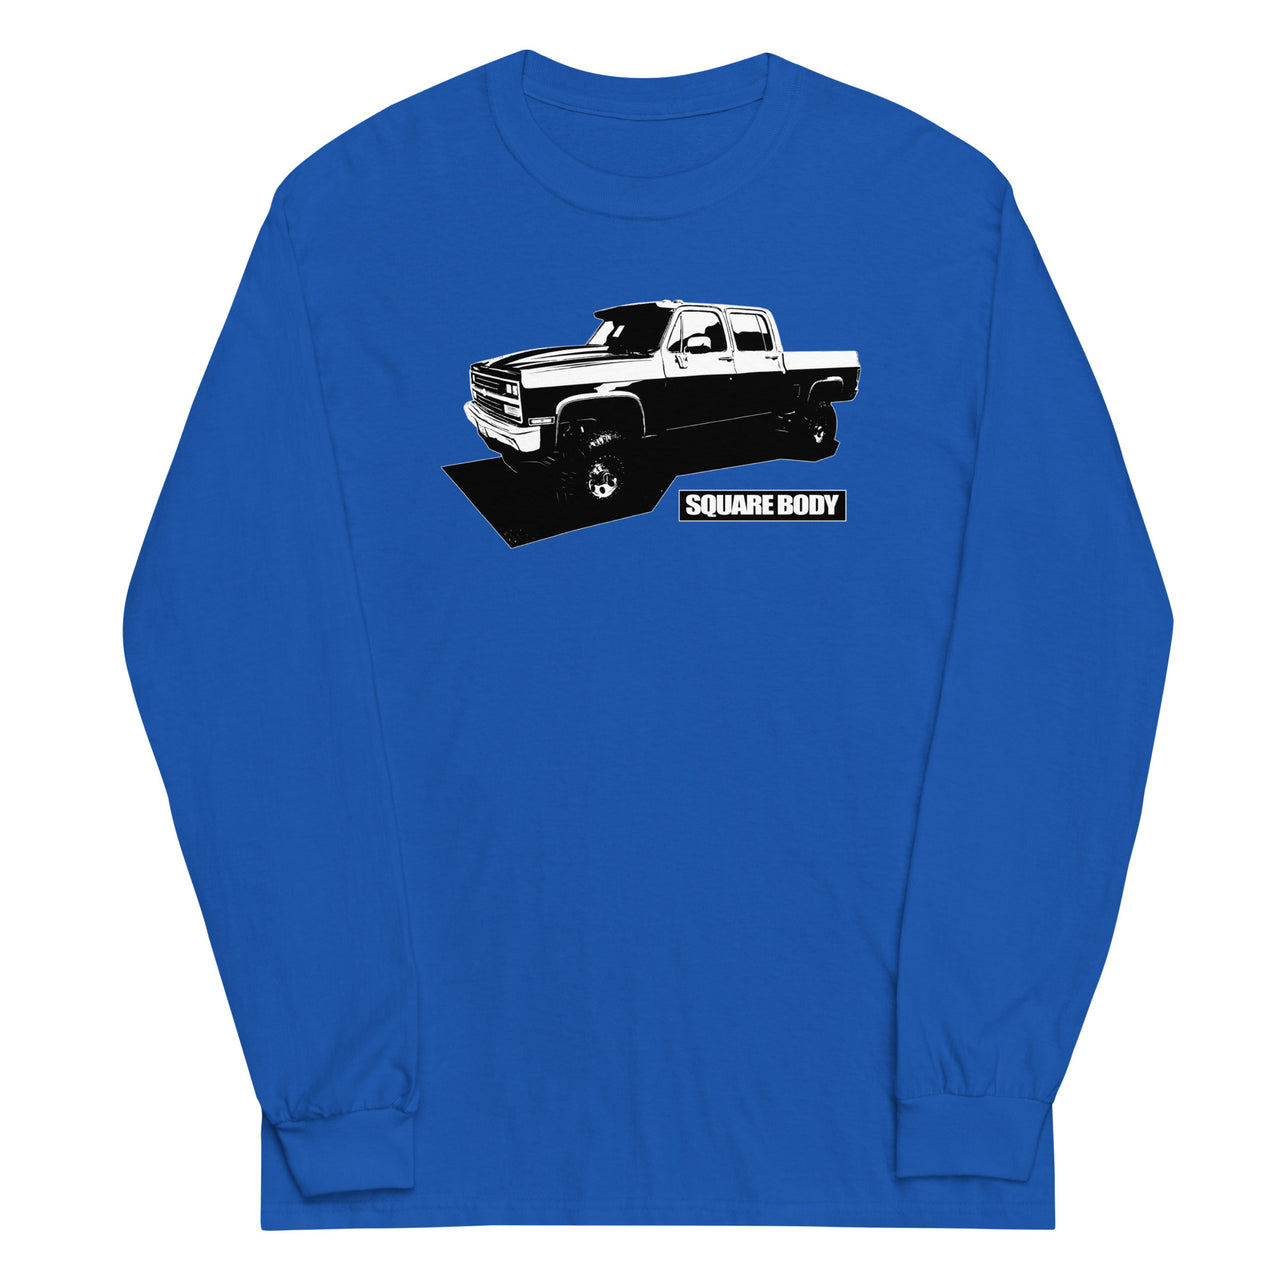 Crew Cab Square Body Truck Long Sleeve Shirt in royal